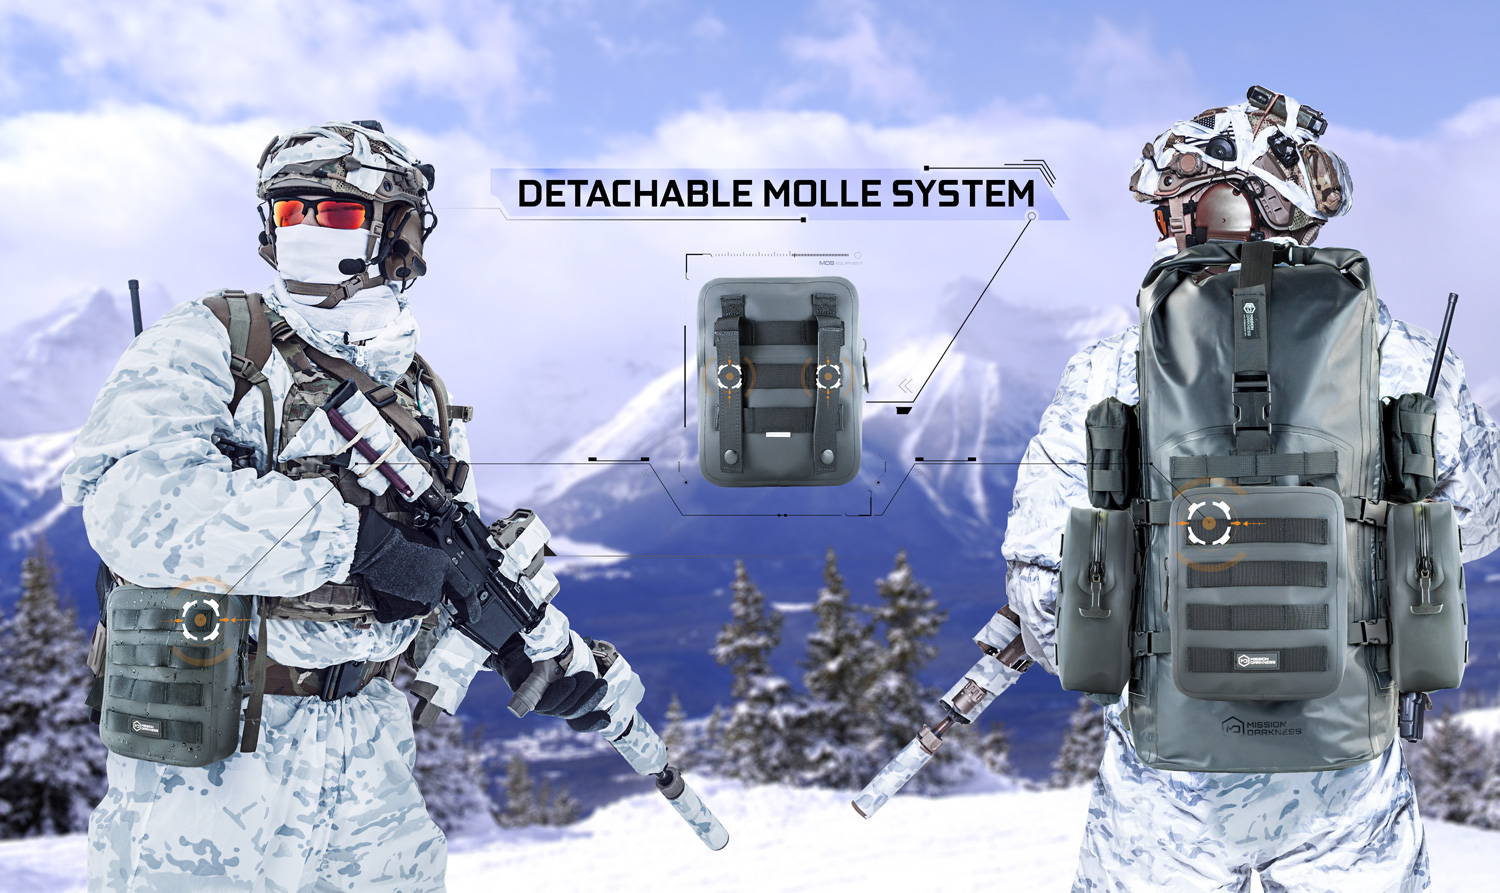 Mission Darkness MOLLE Faraday Pouch detachable system isolates mobile devices and repels water